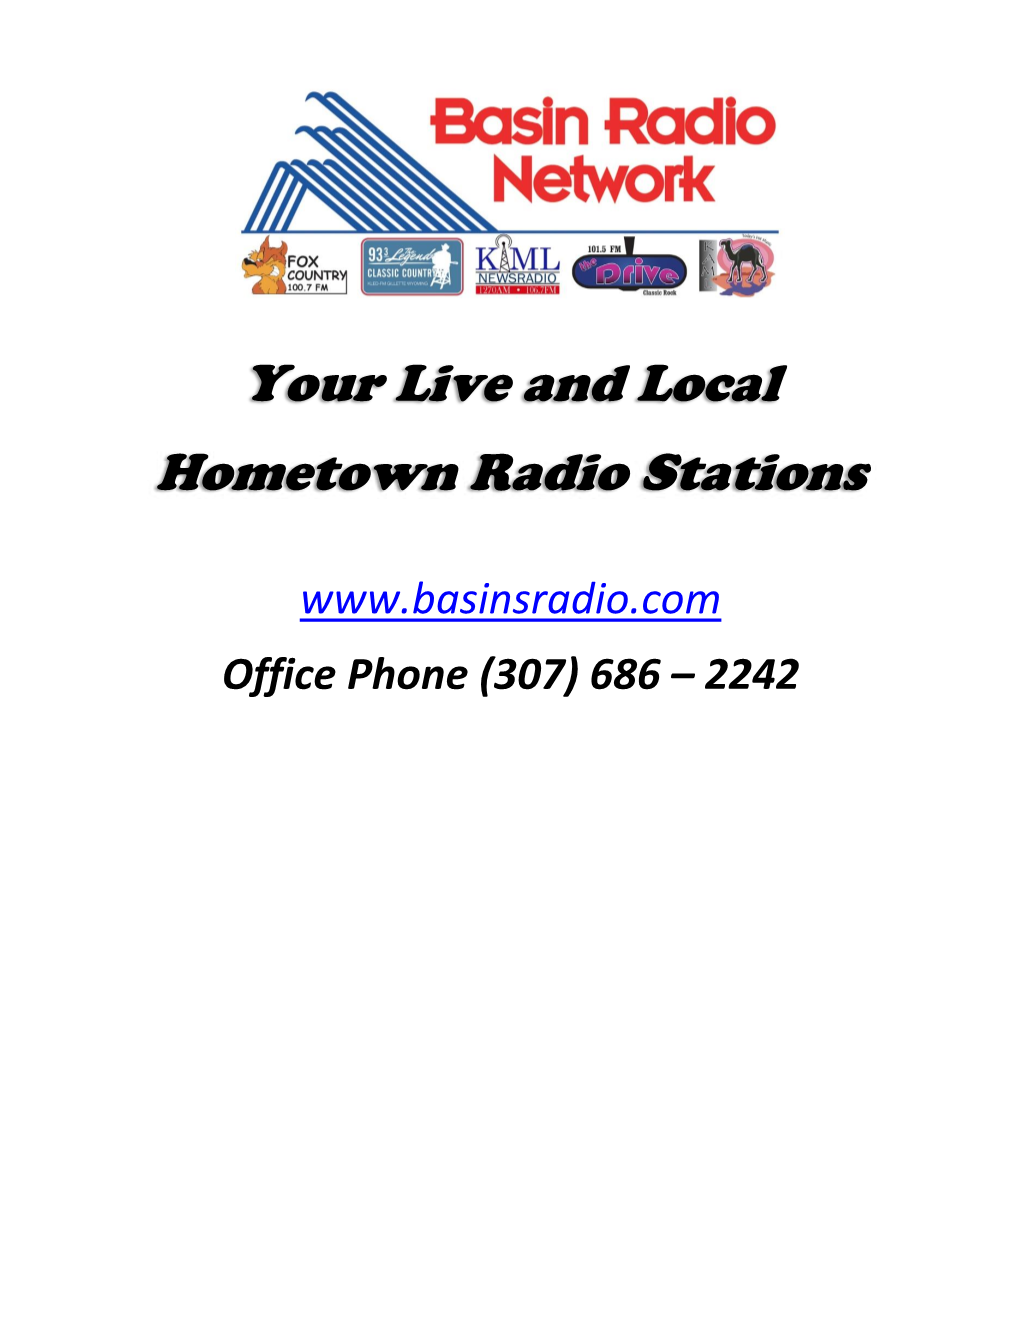 Your Live and Local Hometown Radio Stations